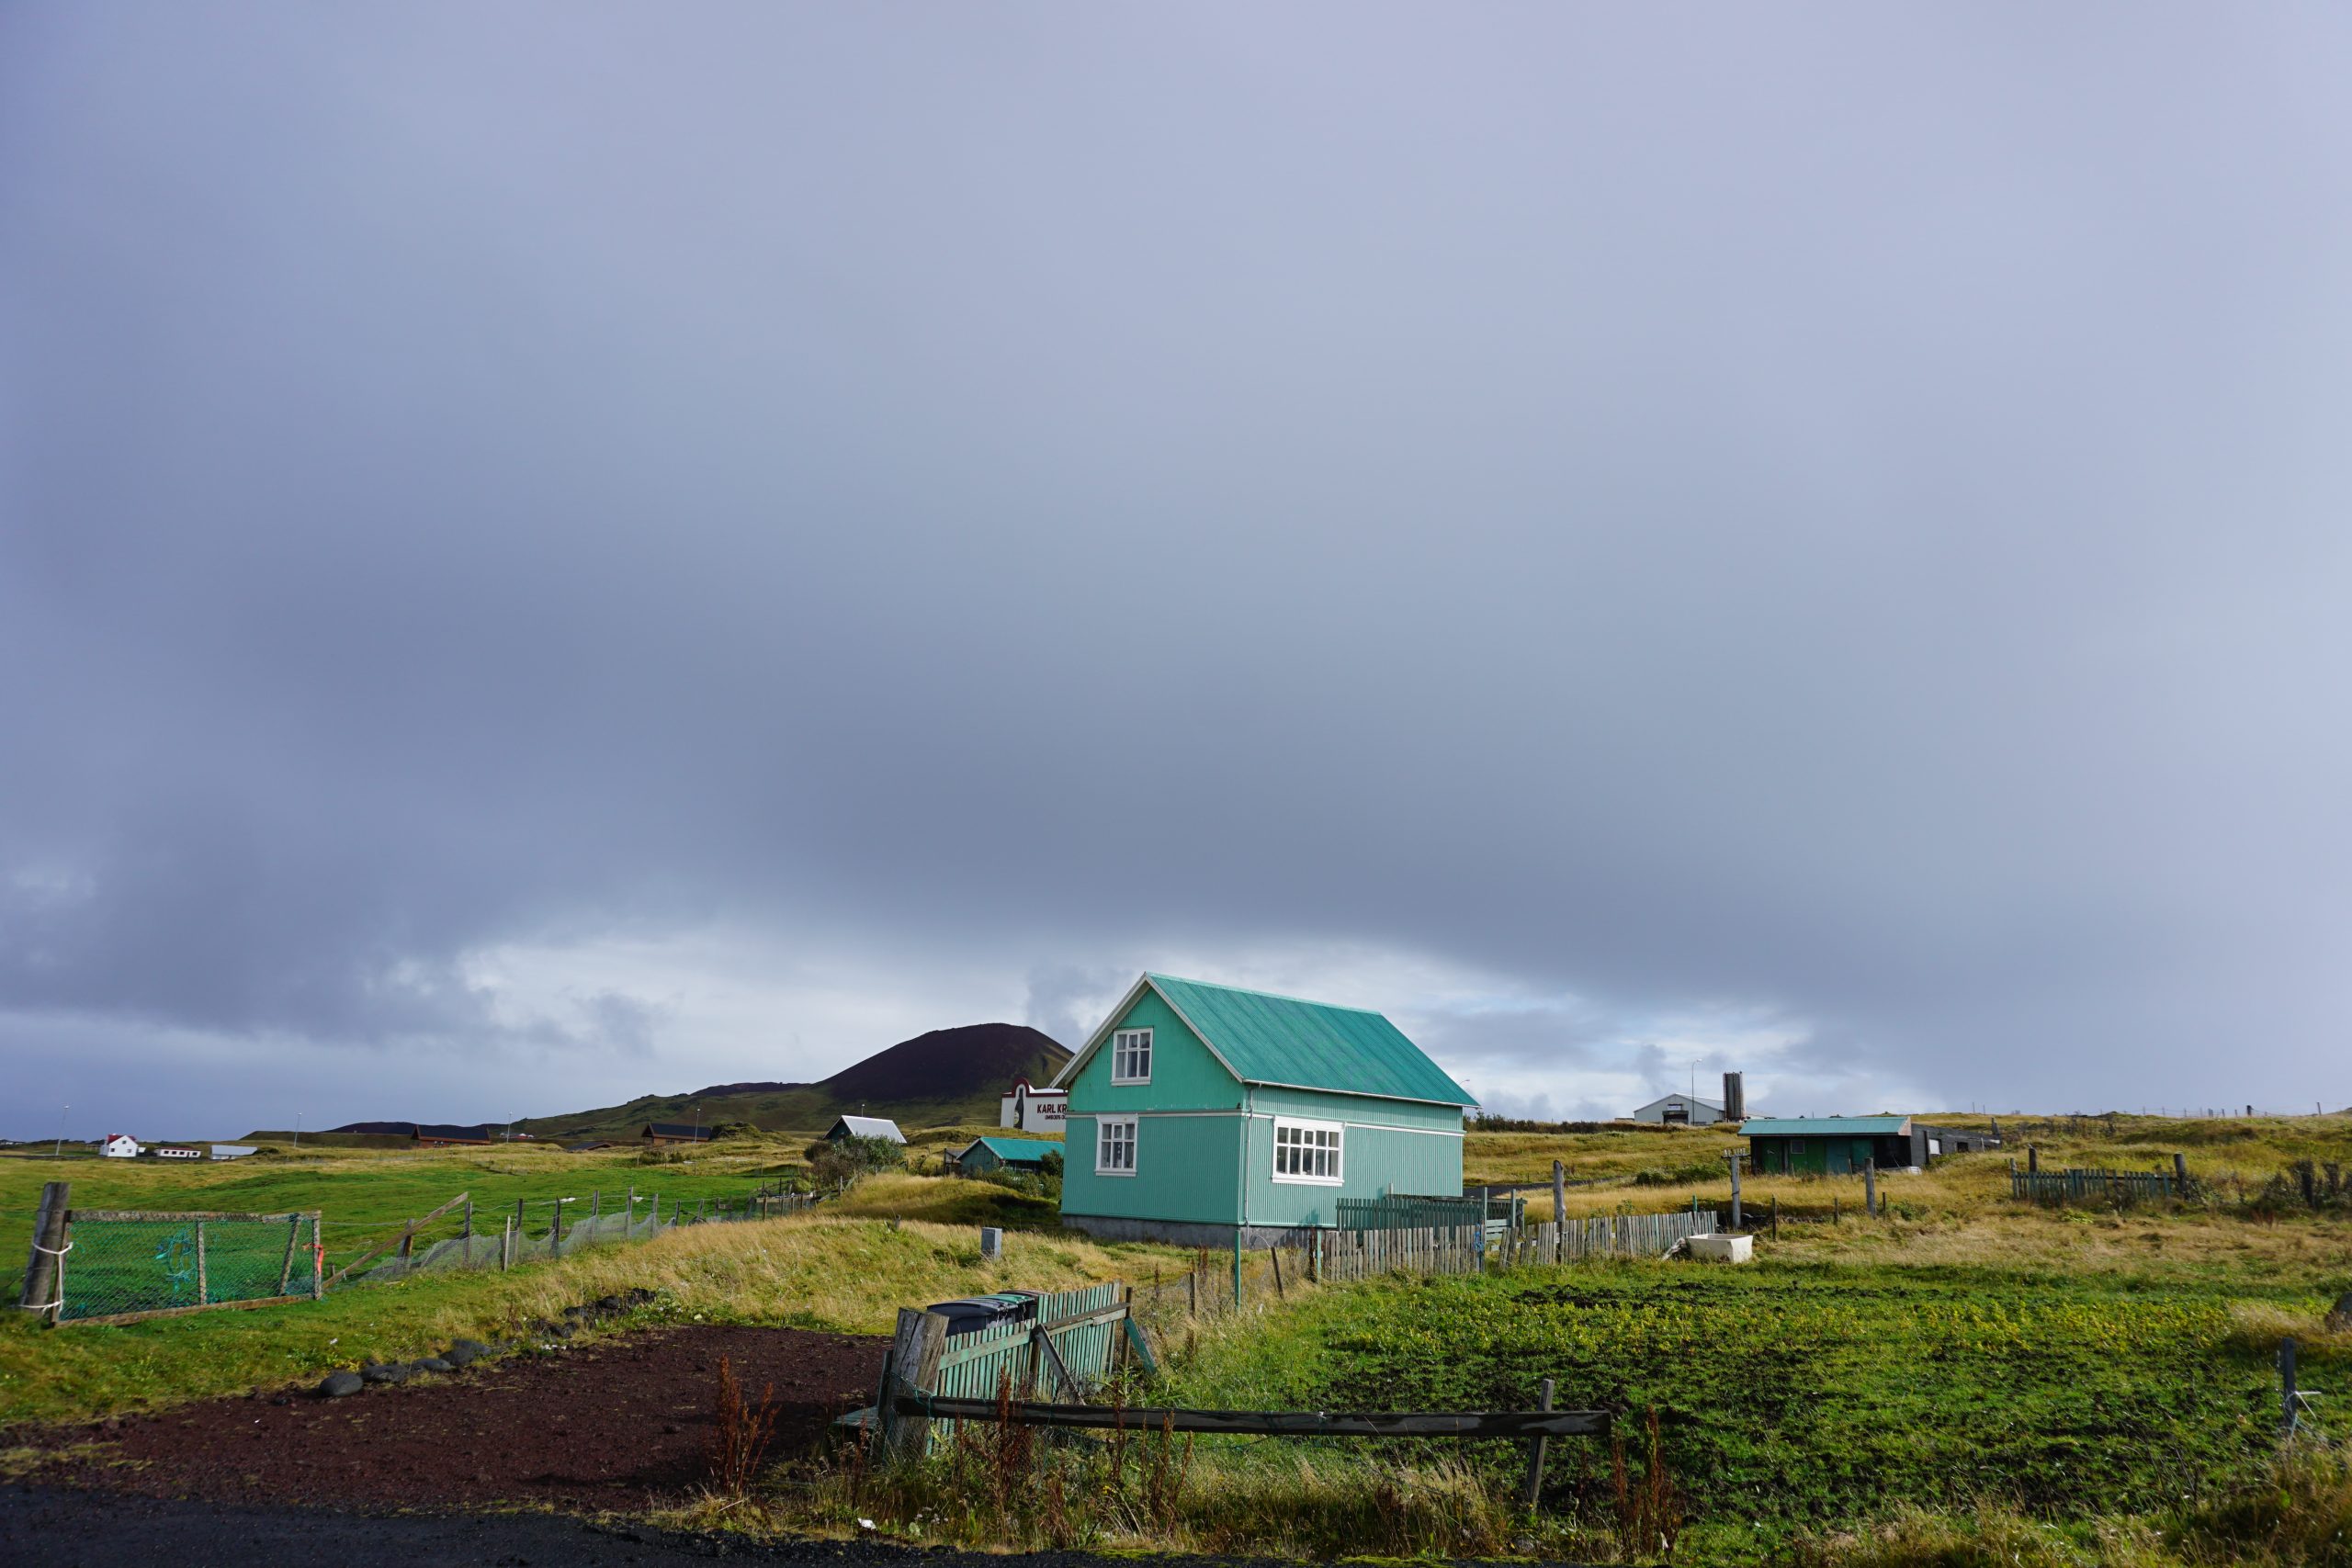 Bright coloured sheds can be seen around the Westman Islands